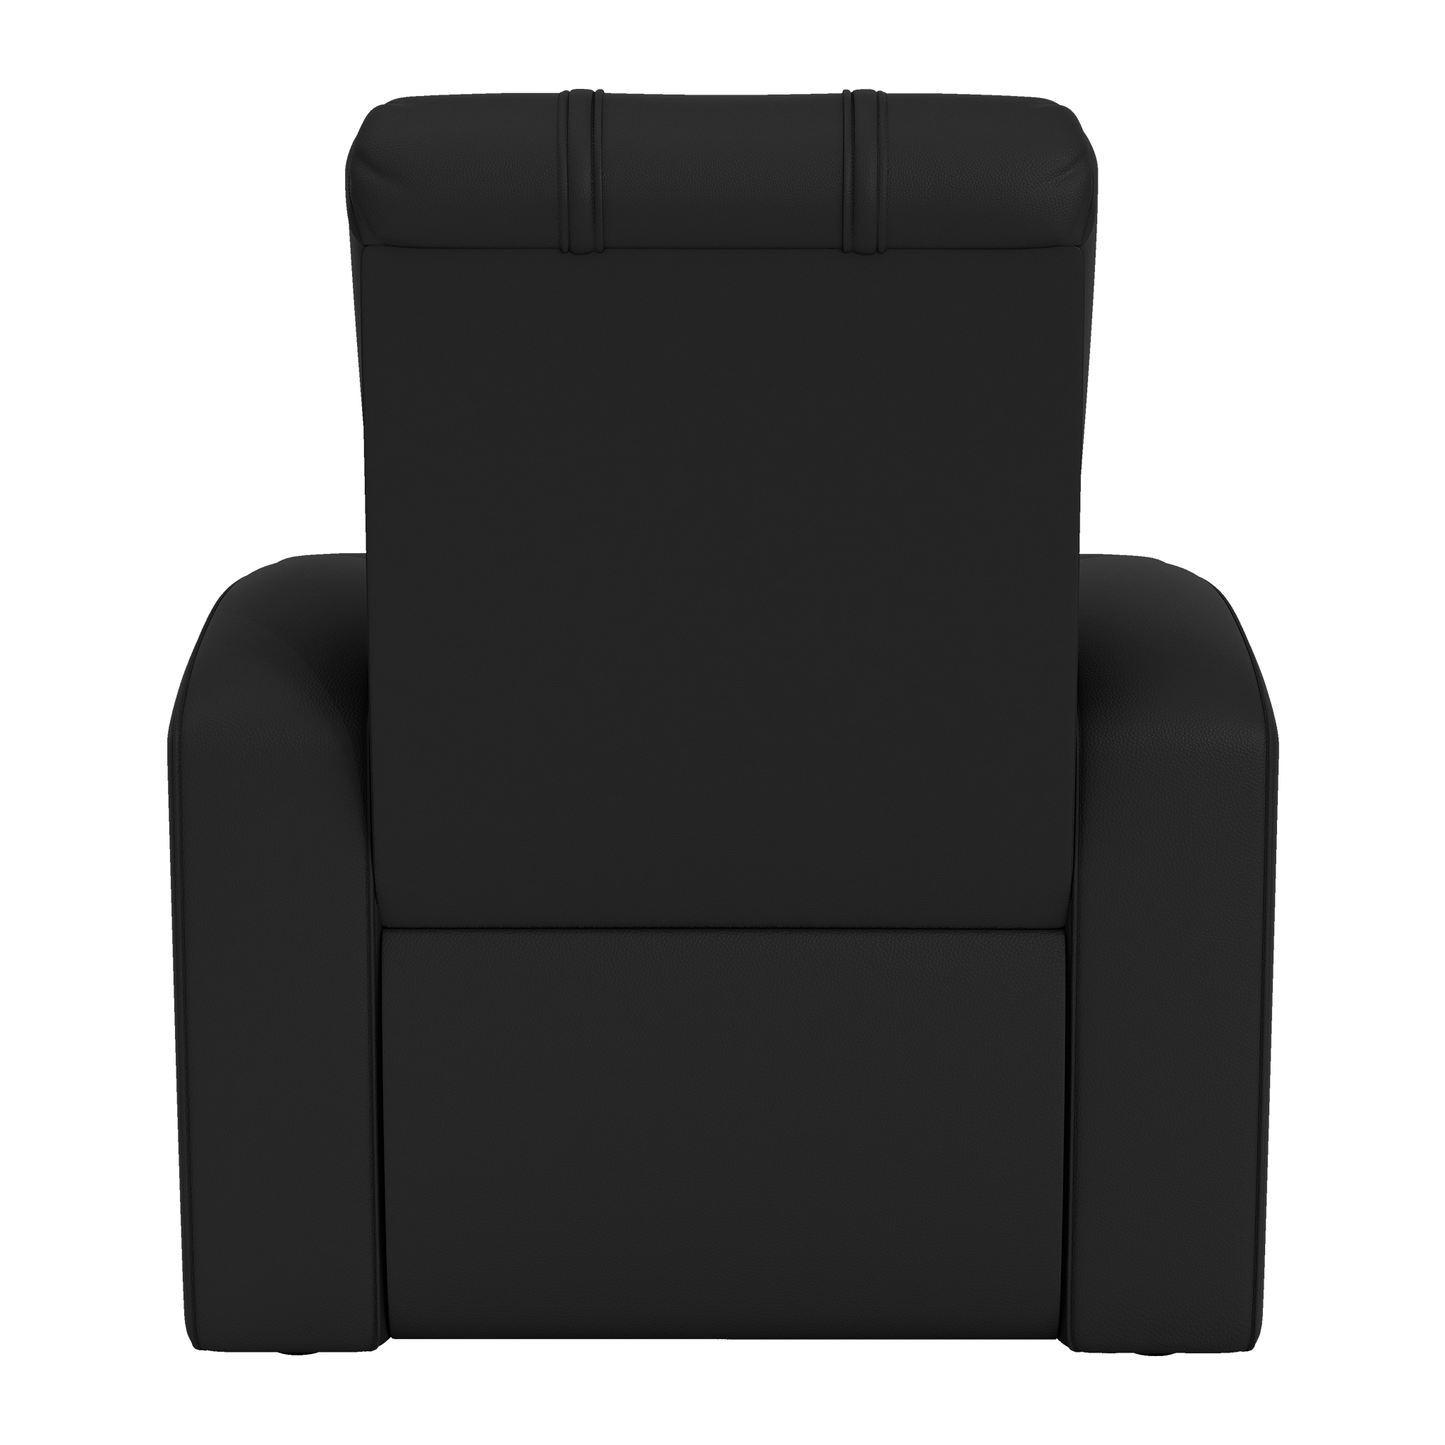 Relax Home Theater Recliner with Cincinnati Reds Secondary